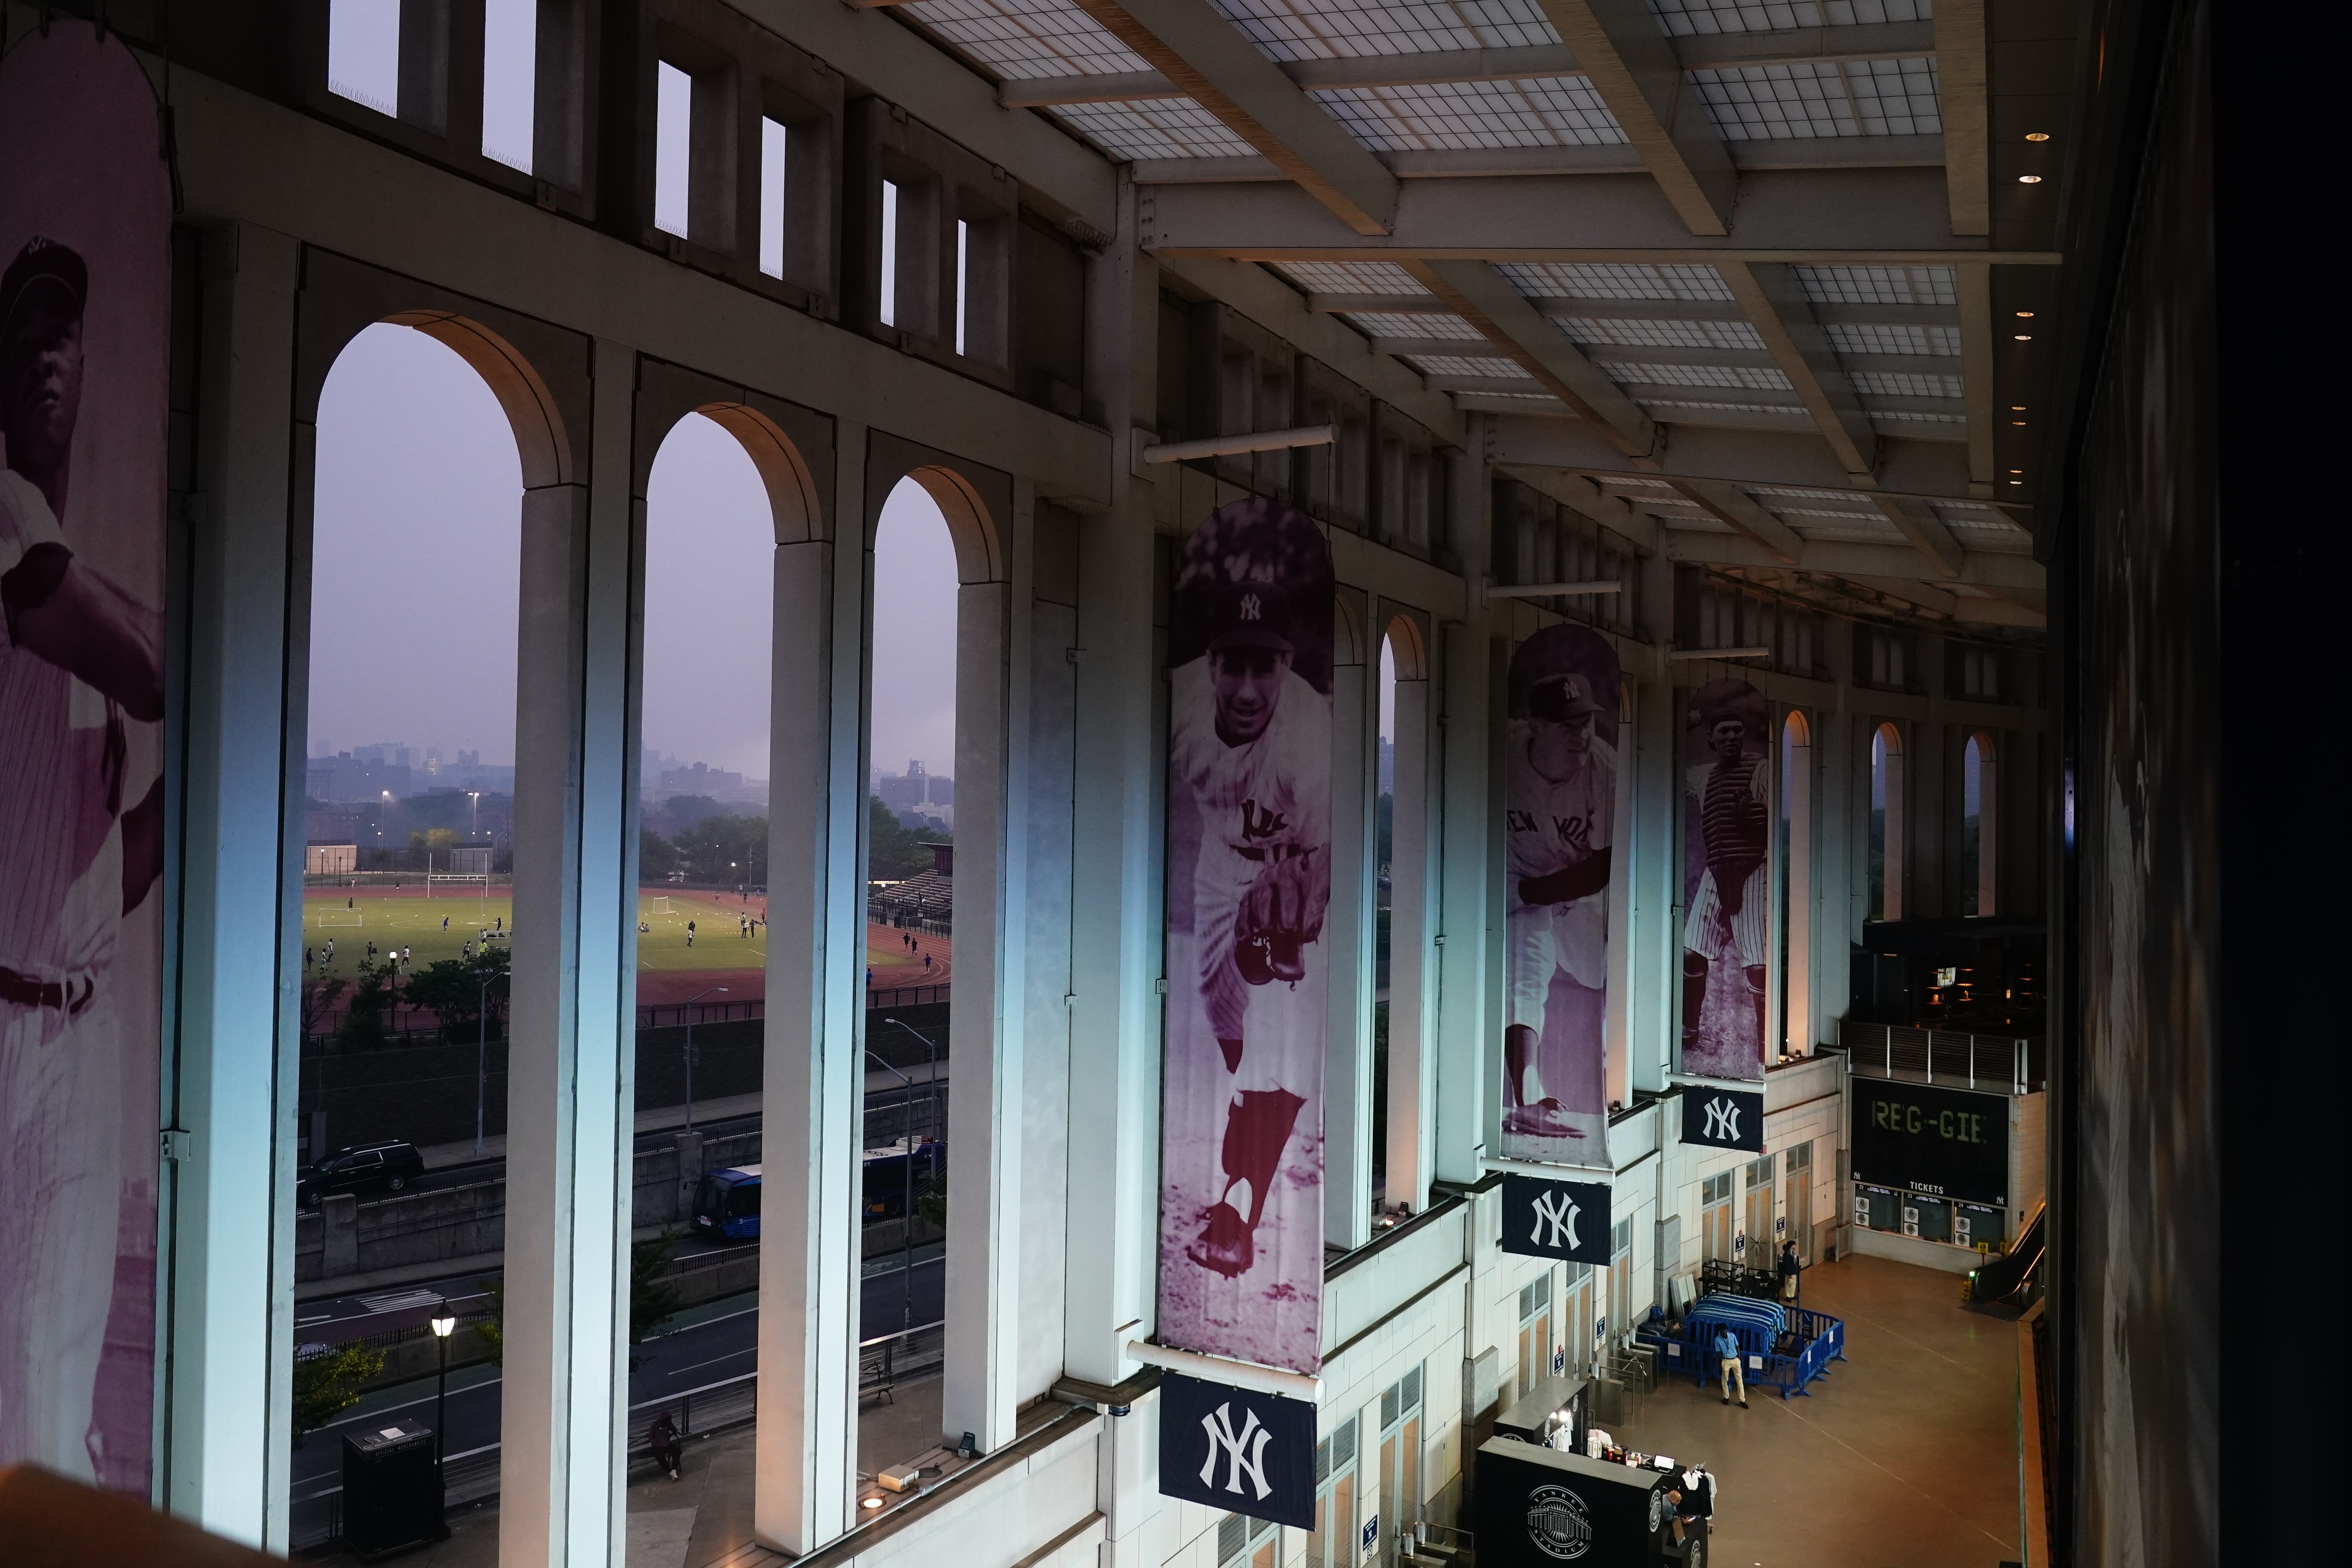 Check out these photos of the smokey, hazy scene at Yankee Stadium – NBC  Sports Chicago